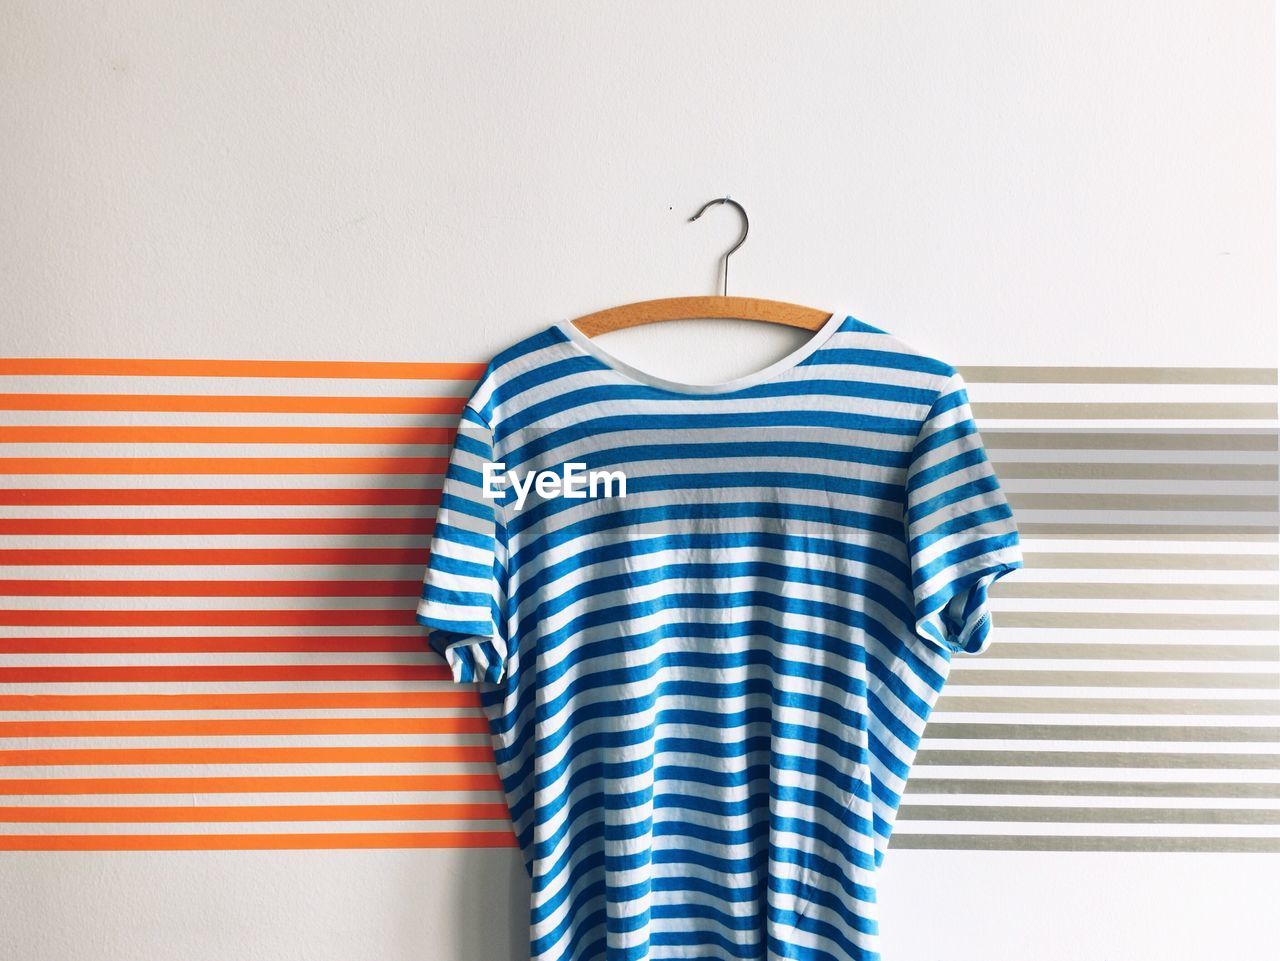 Striped t-shirt hanging on coathanger against patterned wall